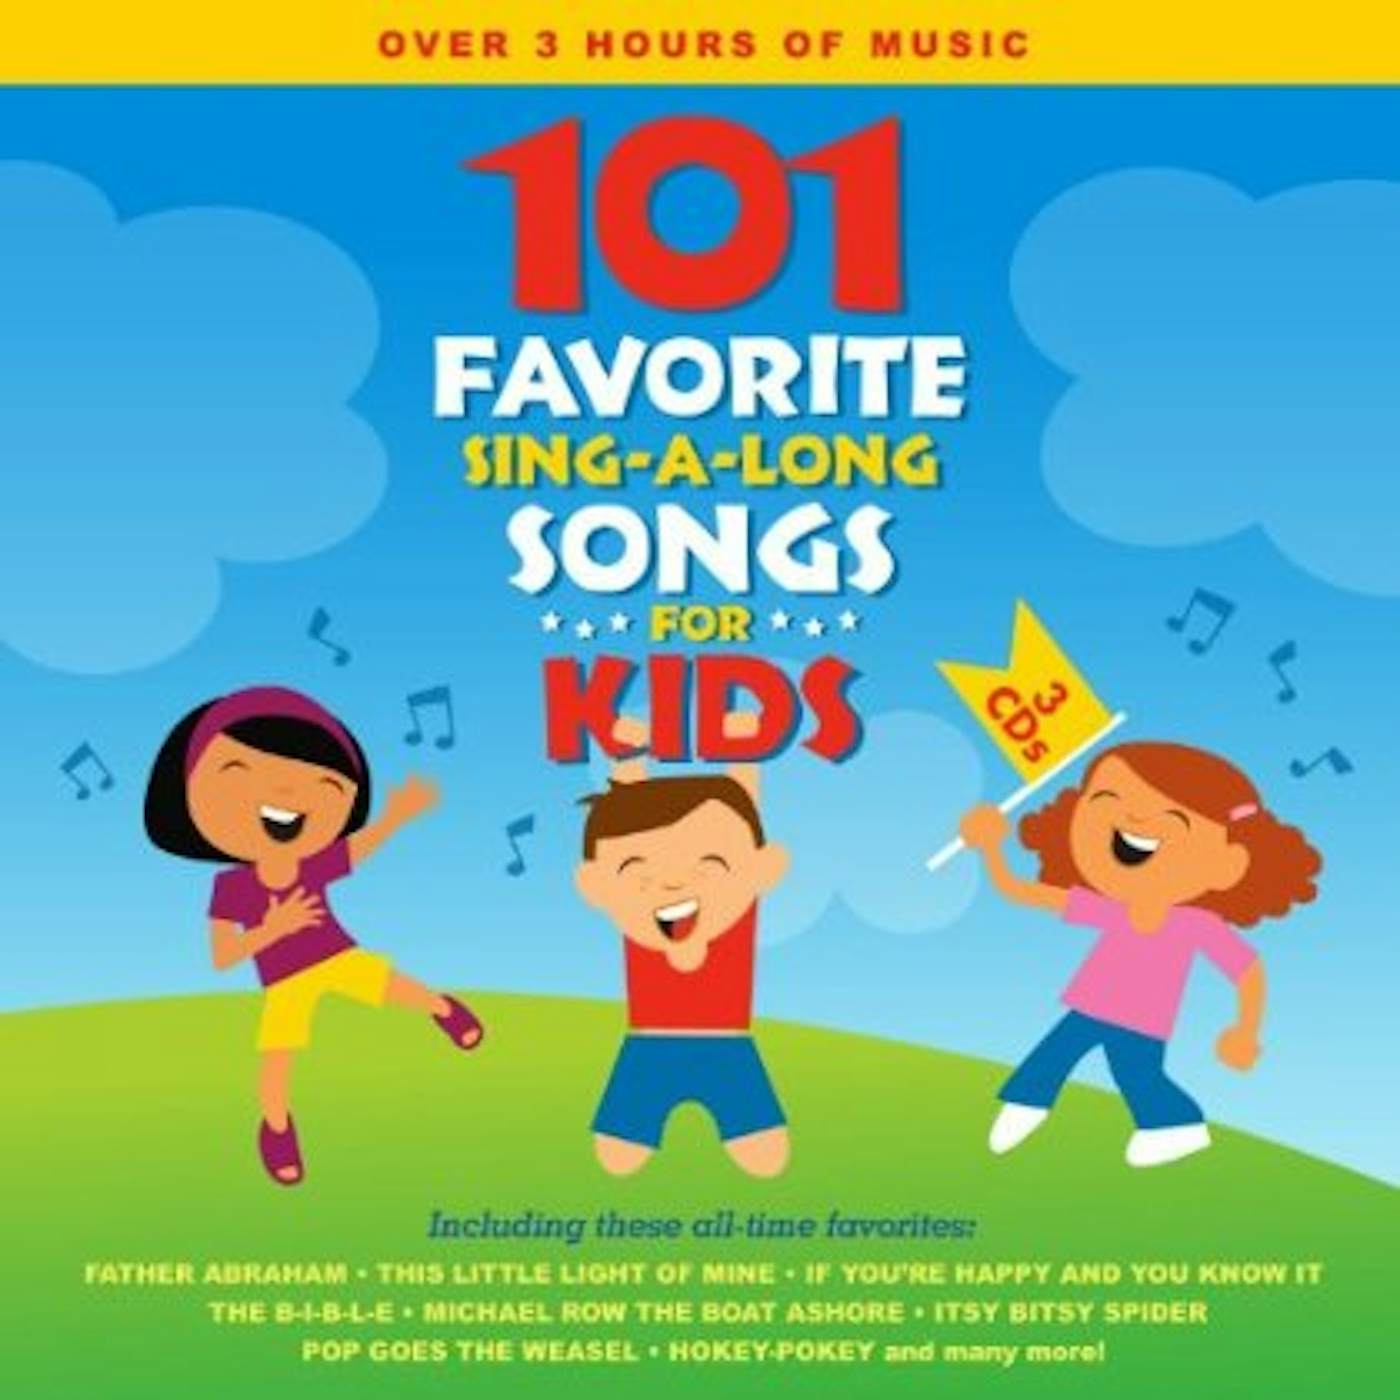 The Itsy Bitsy Spider & More Children's Songs - Album by Itsy